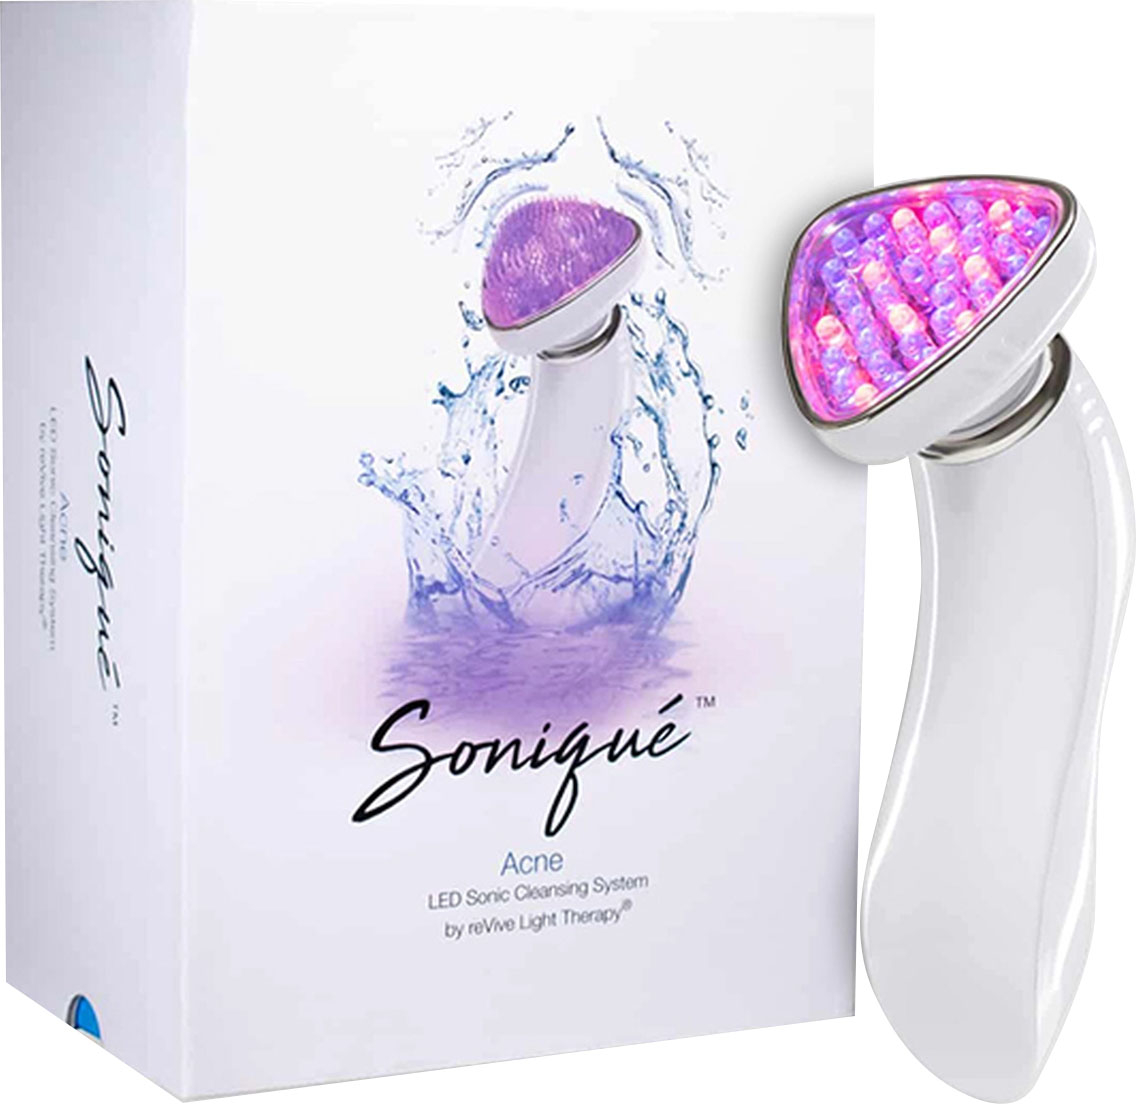 

reVive - Sonique Clinical Strength Light Therapy For Acne Treatment - White